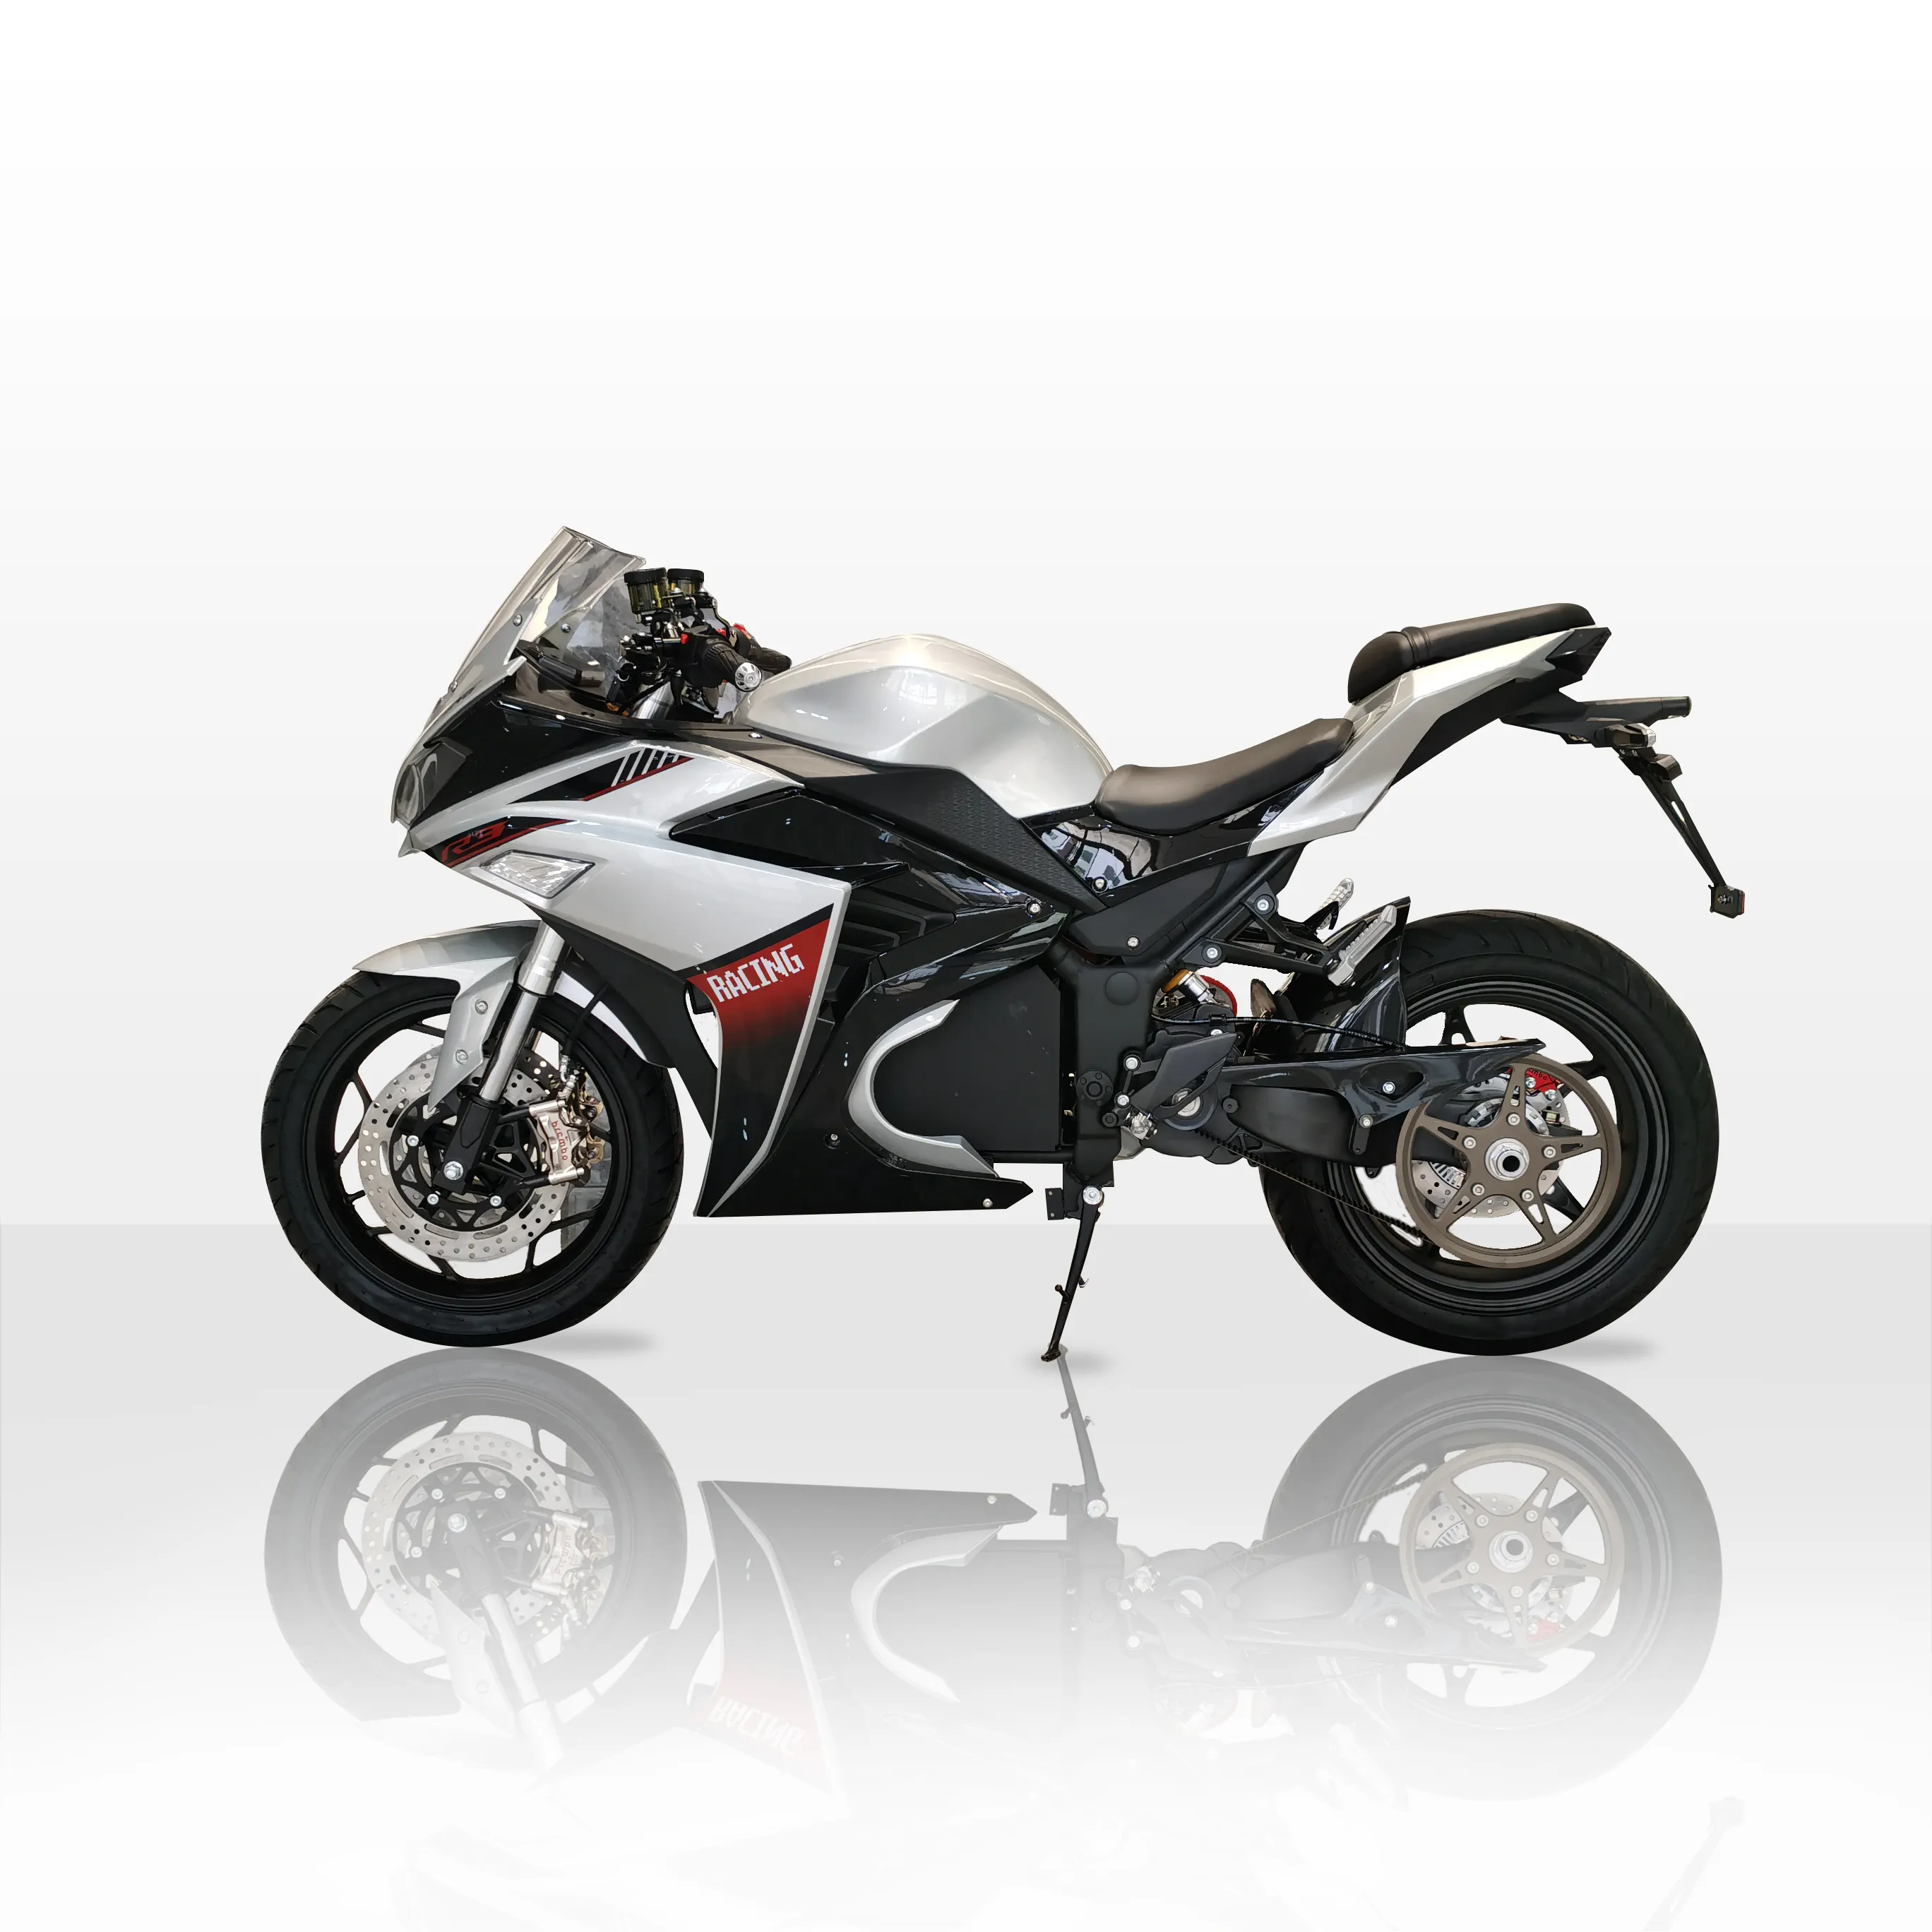 Driven By Mid-Belt Motor 8000w 140km/h 72v60Ah-120Ah Electric Motorcycle With Brembo